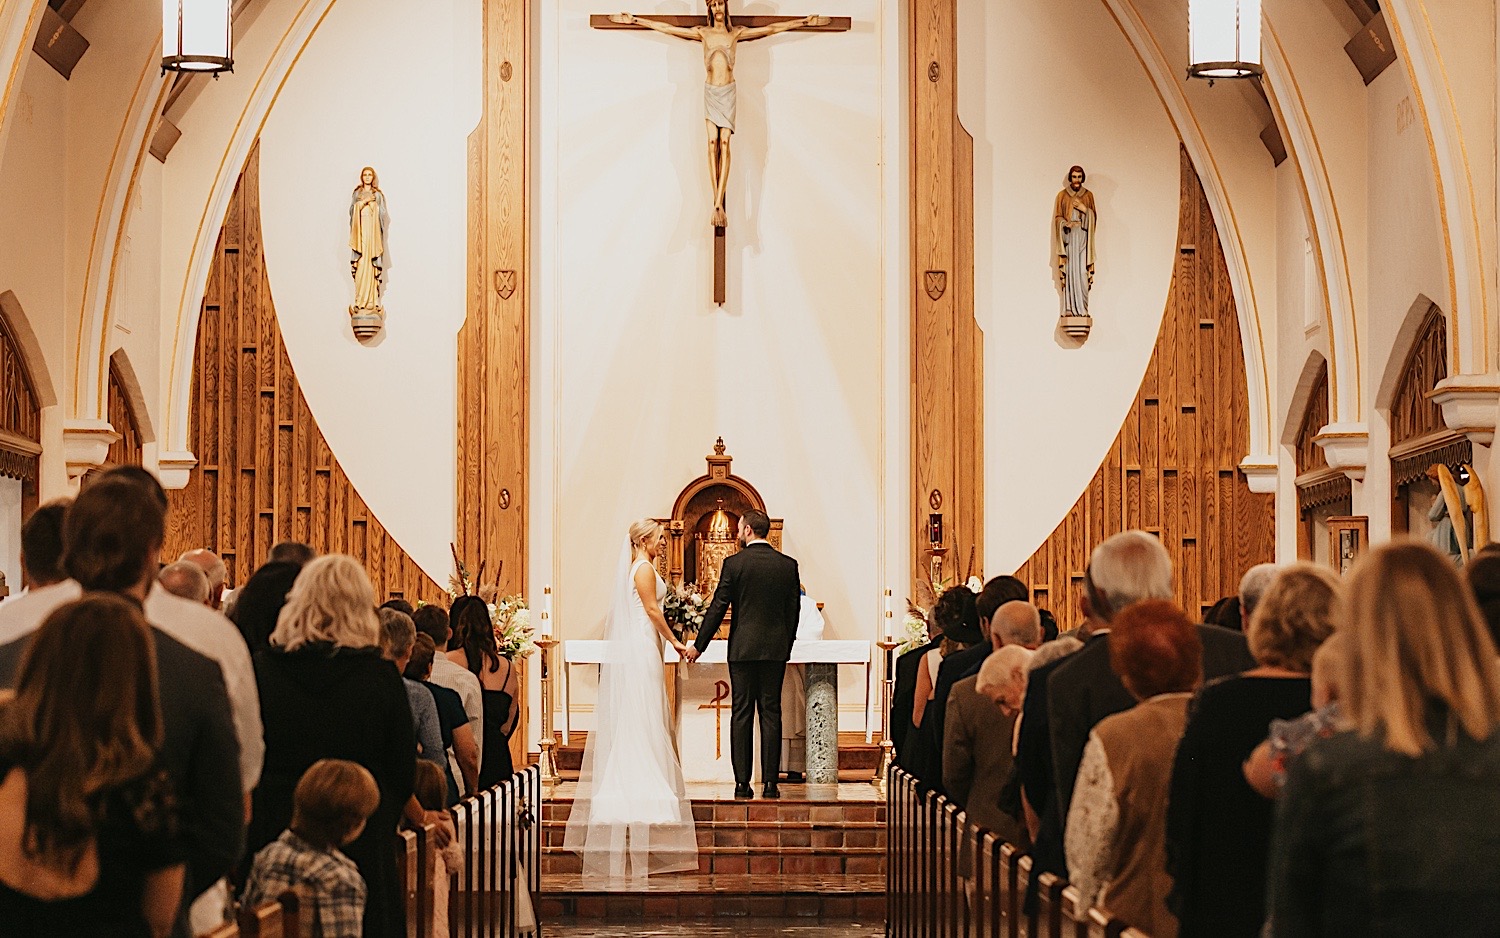 In a church a bride and groom stand on the altar holding hands during their wedding ceremony